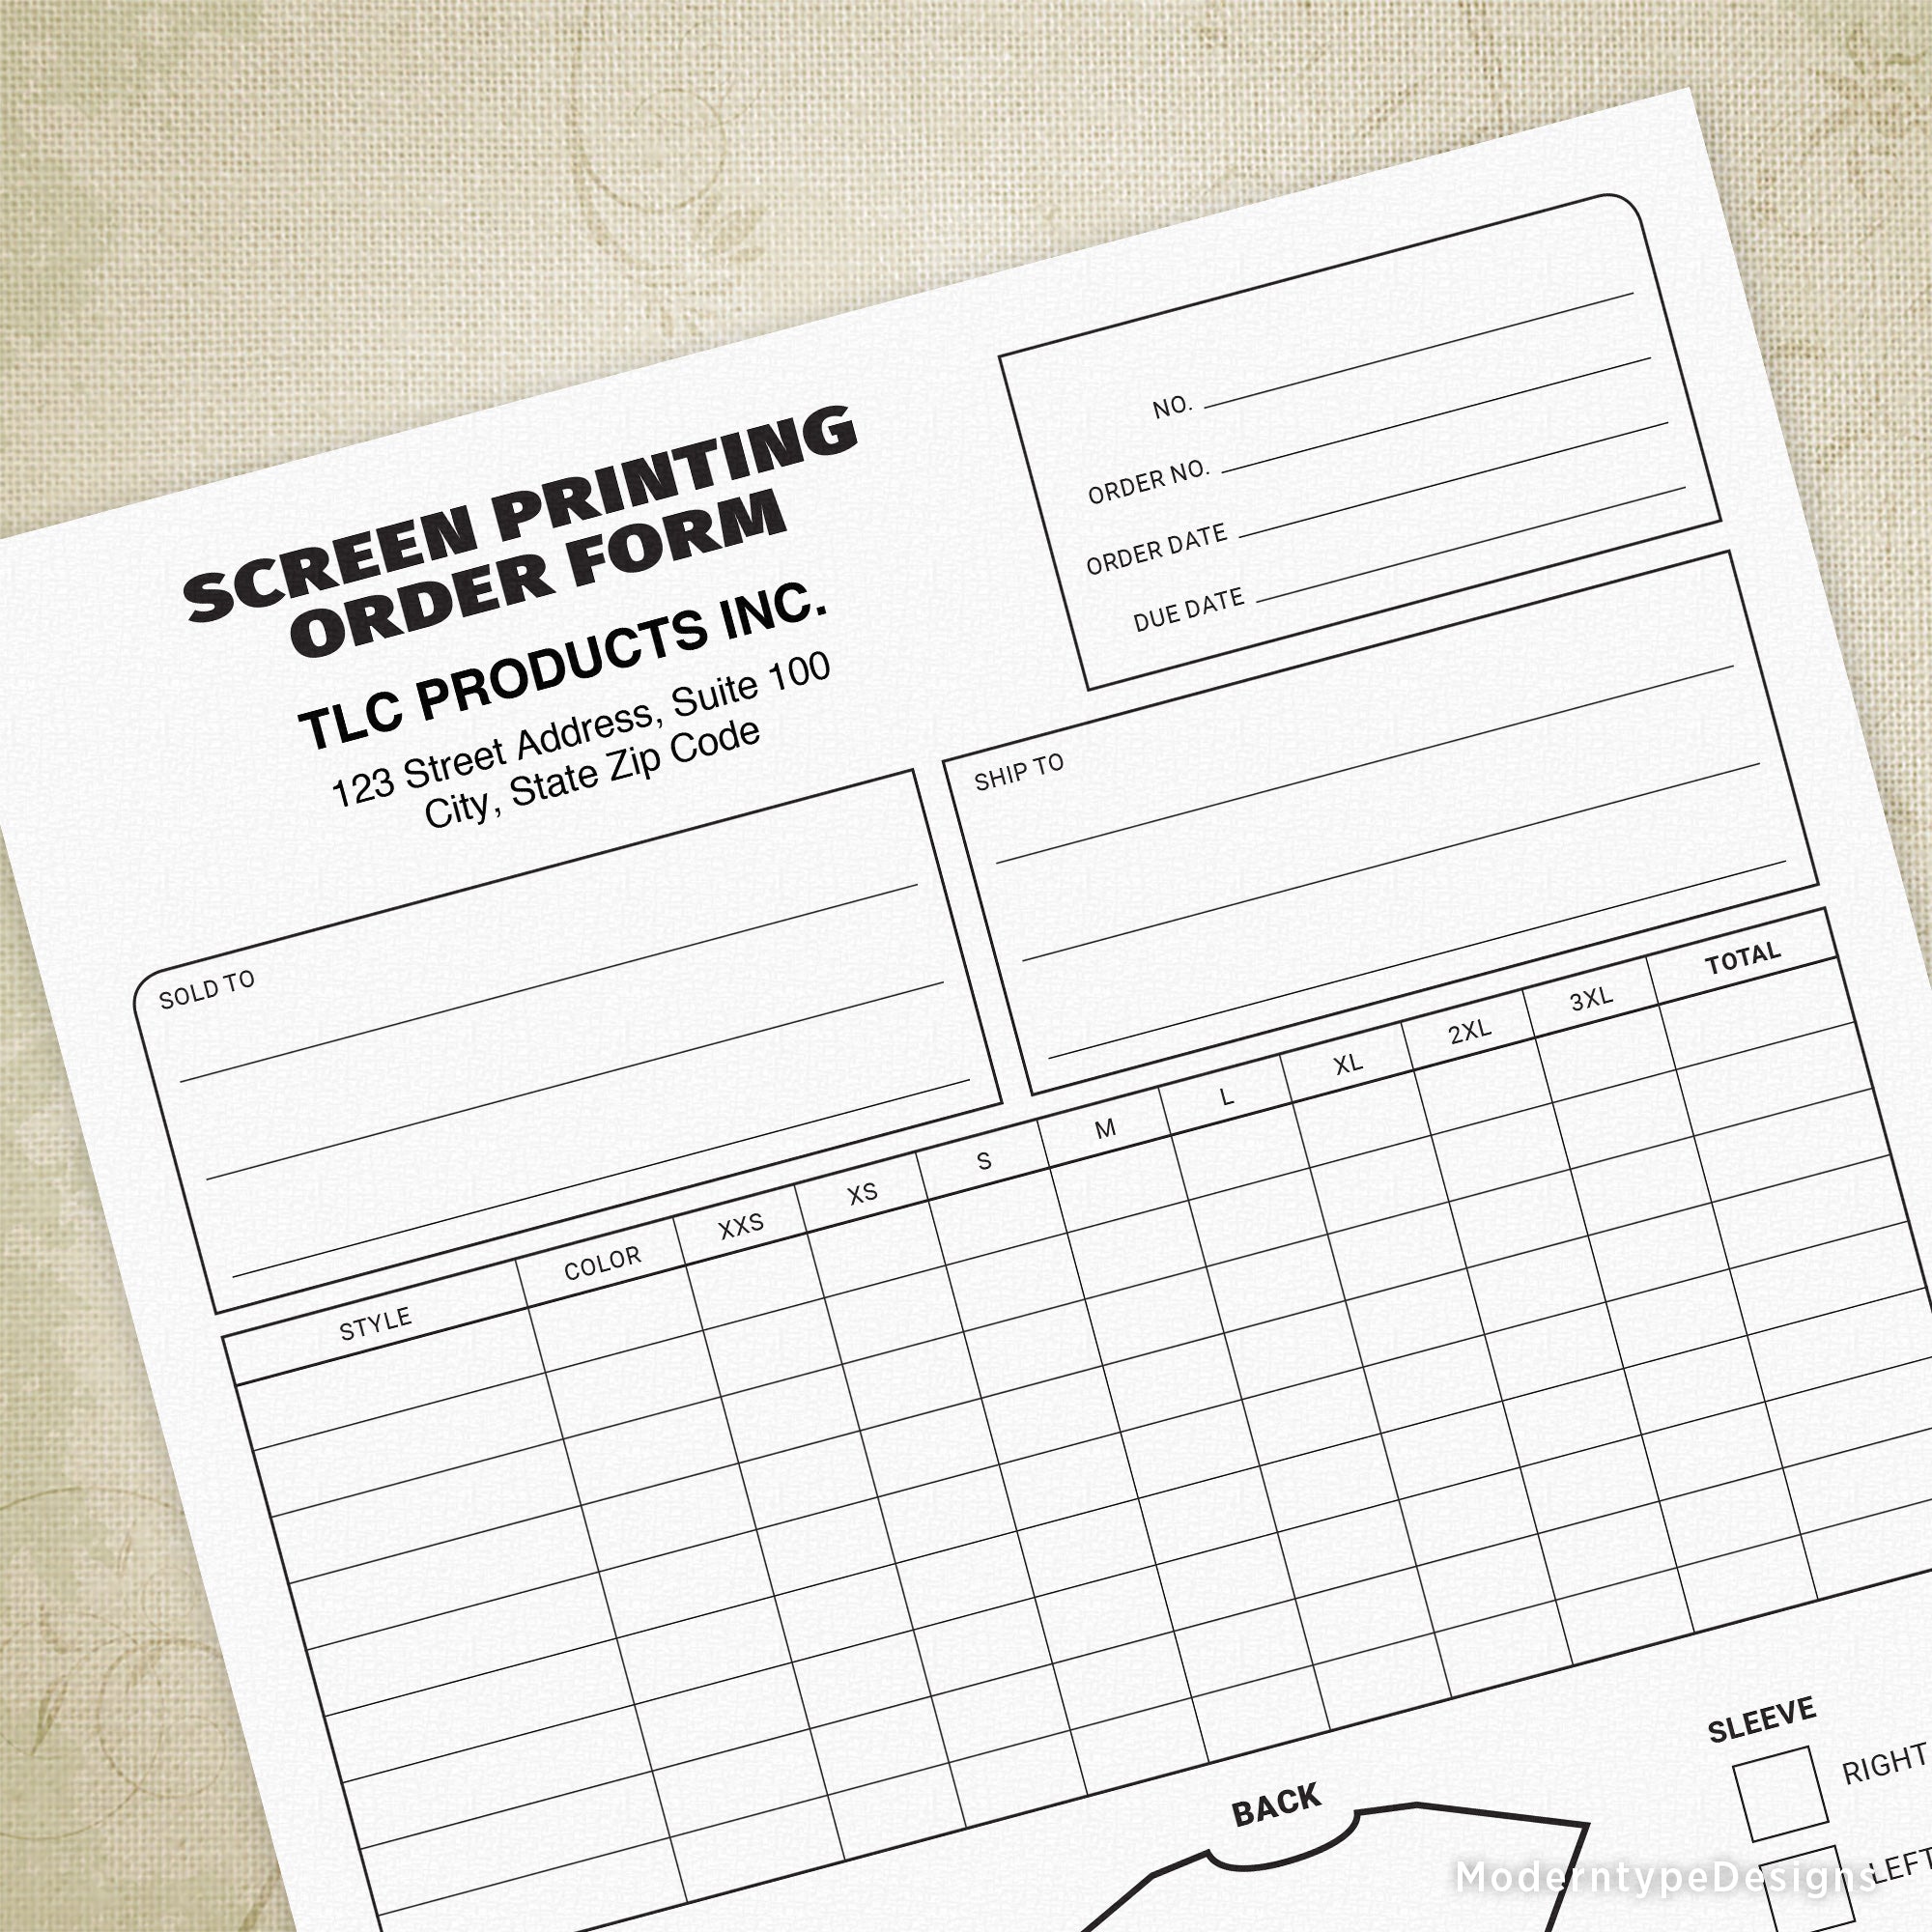 Screen Printing Order Form Printable, Personalized